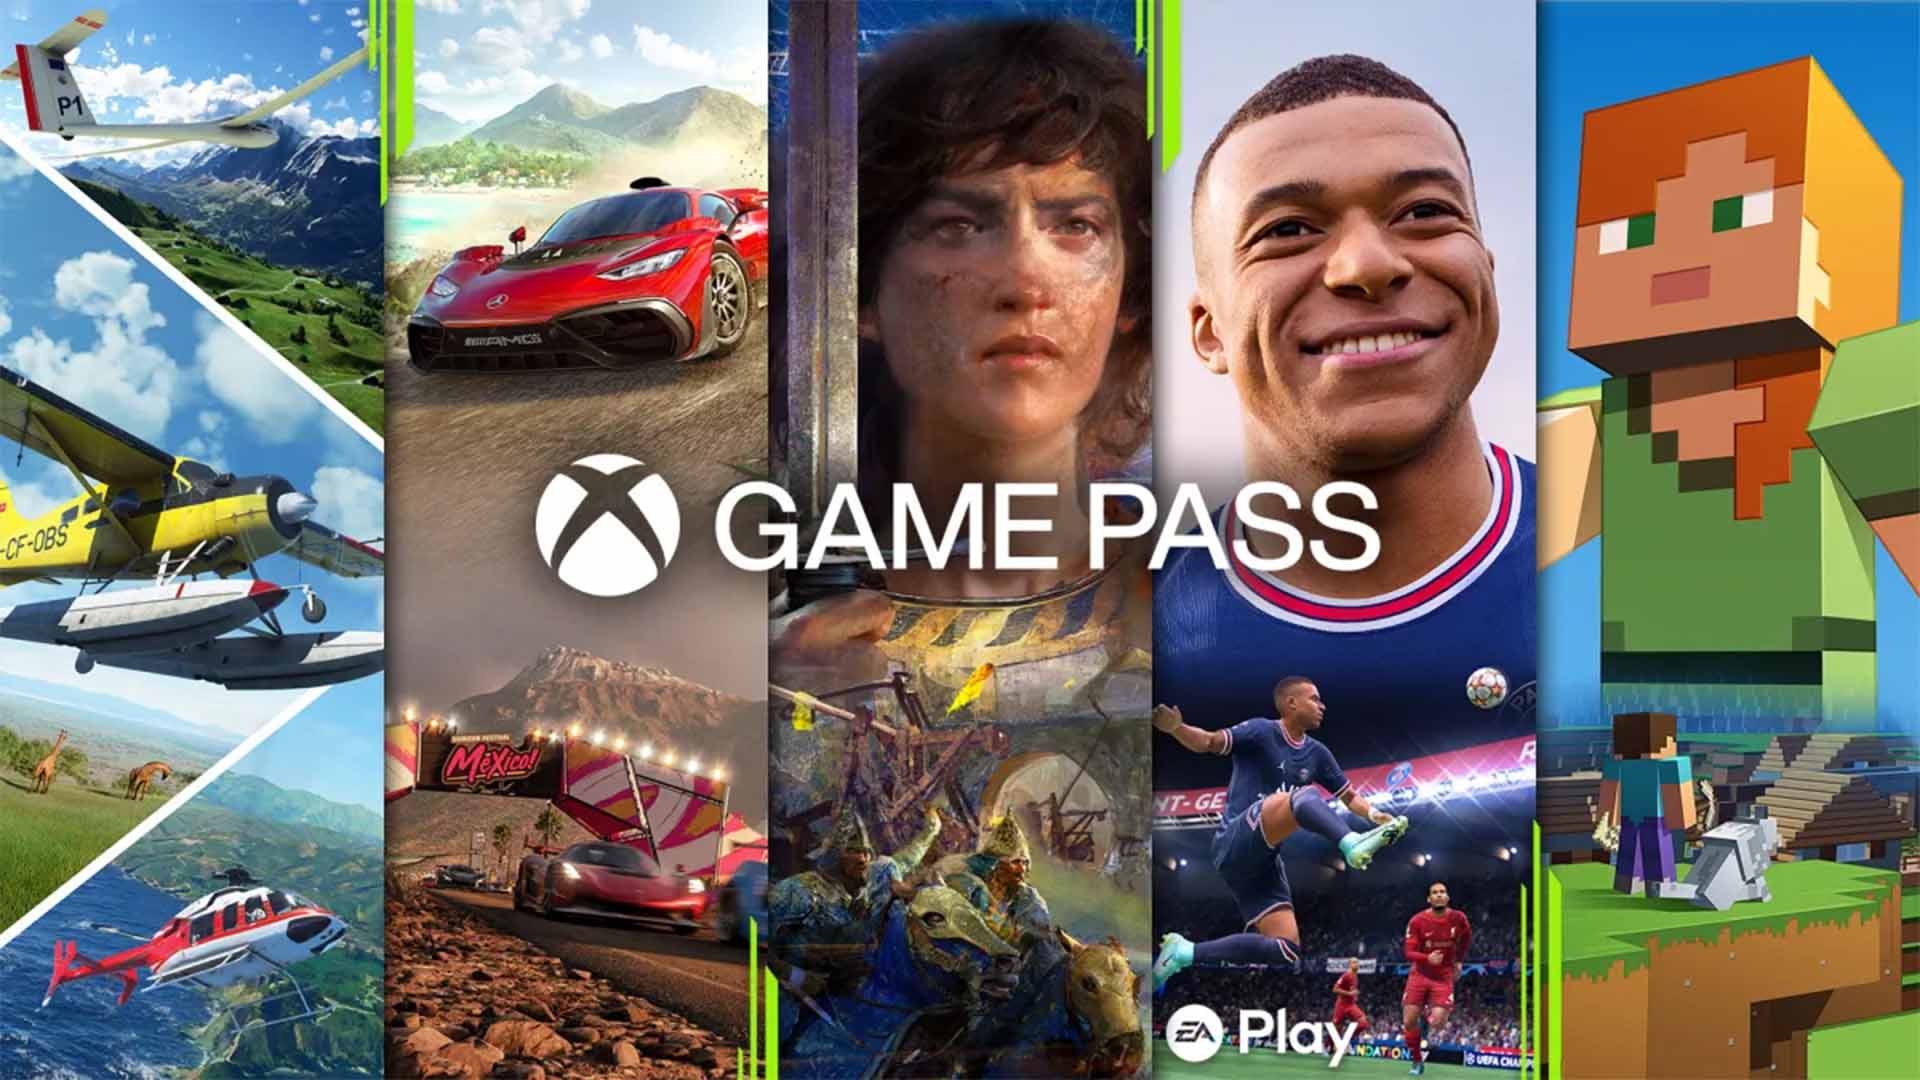 New Xbox Game Pass Referral Program Lets You Share With up to 5 Friends